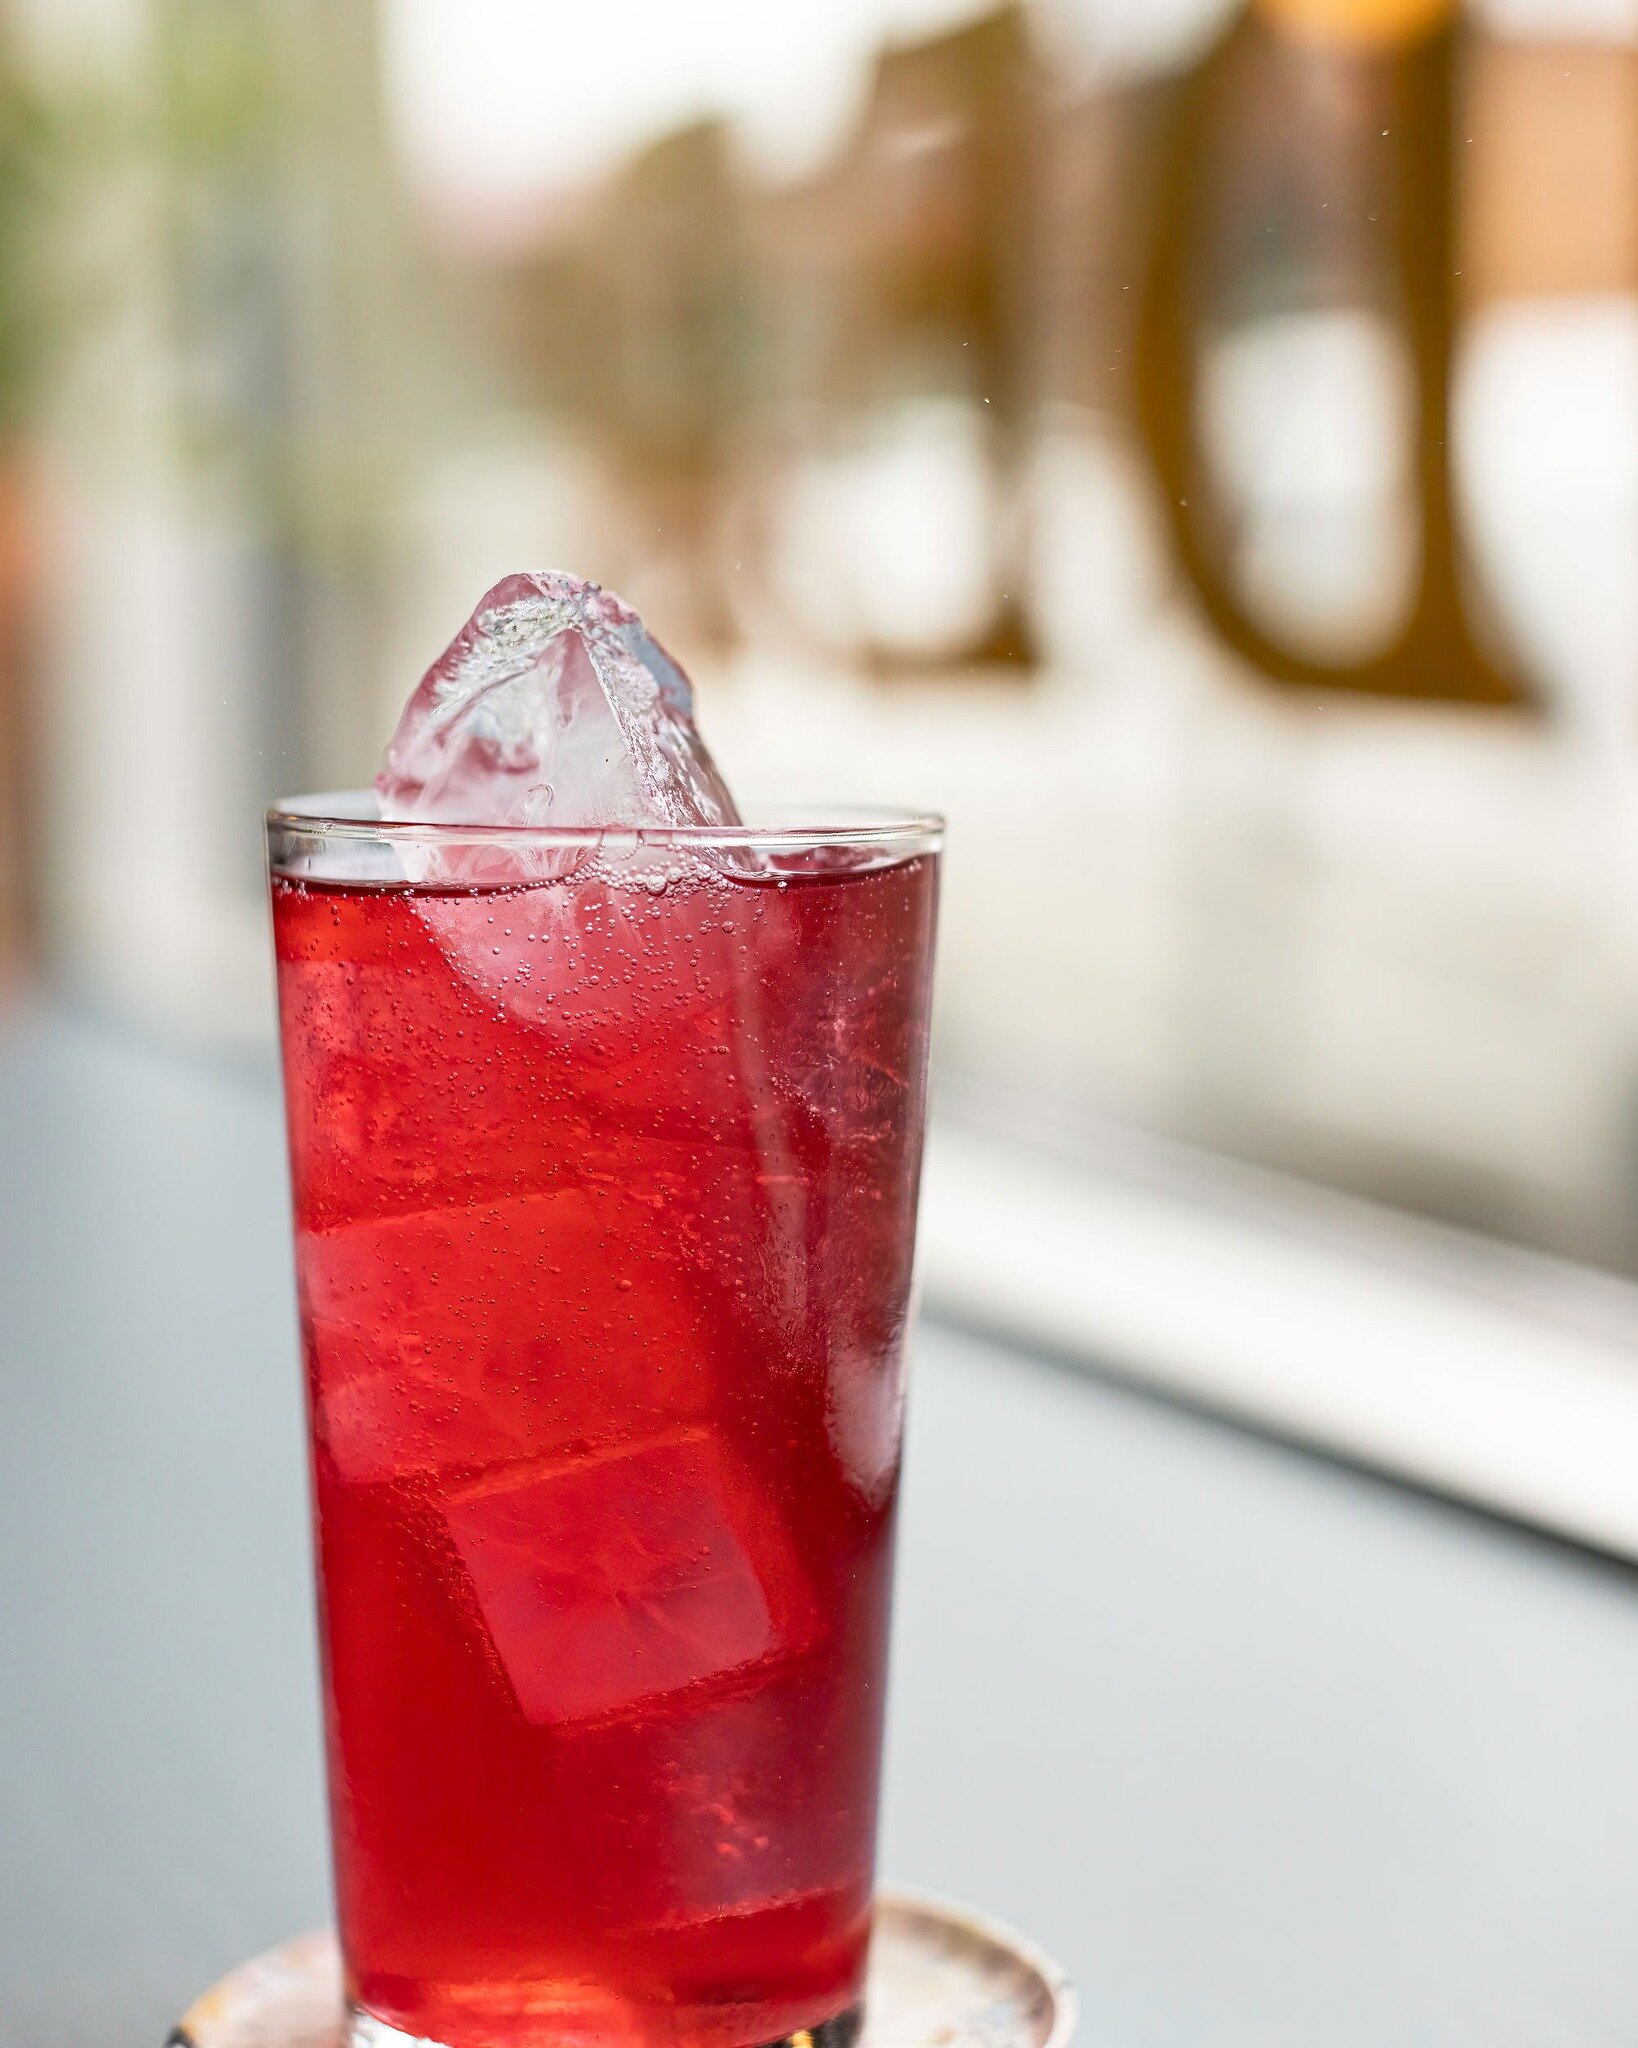 We make drinks to delight + satisfy, including non-alcoholic ones like our always-on-the-menu ROSELLE (0% abv) made with hibiscus, lemon, and spices. 

Our goal with the ROSELLE is to capture the fresh, sweet-sour flavors of hibiscus in a refreshing,